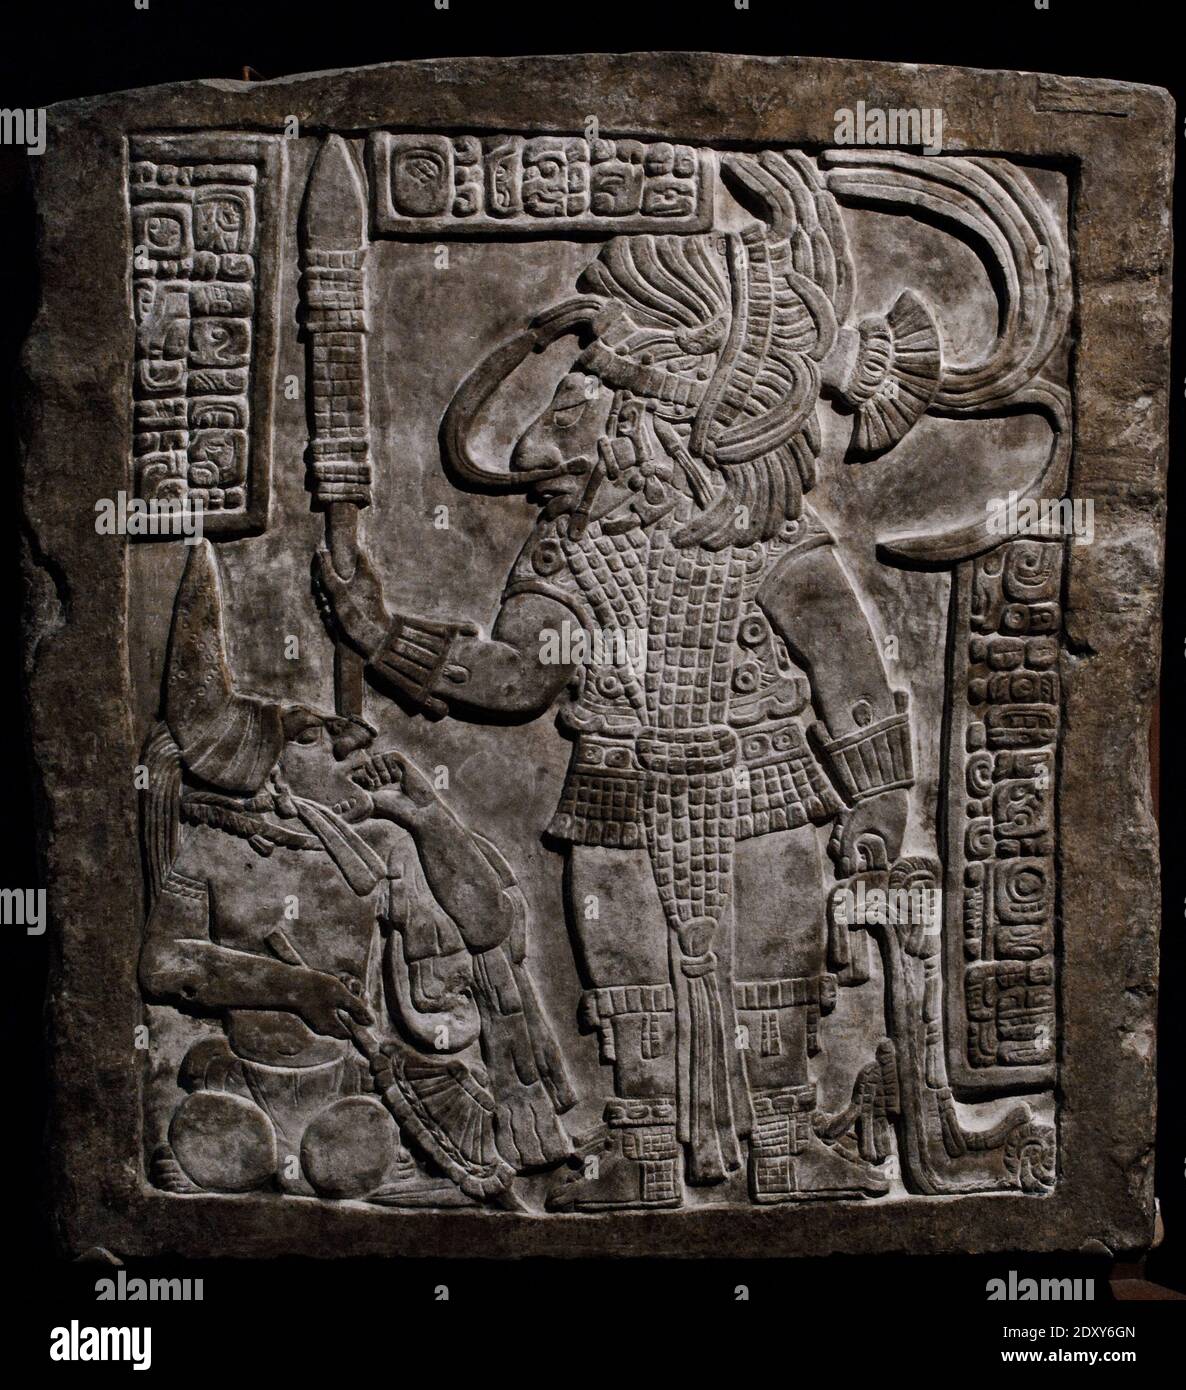 The Yaxchilan Lintels. Lintel 16 (commissioned by Bird Jaguar IV for Structure 21), 755-770 AD. Maya, Late Classic period. Limestone (76,2 x 75,7 cm). Scene depicting king Bird Jaguar IV and a captive at his feet. Chiapas, Mexico. British Museum. London, England, United Kingdom. Stock Photo